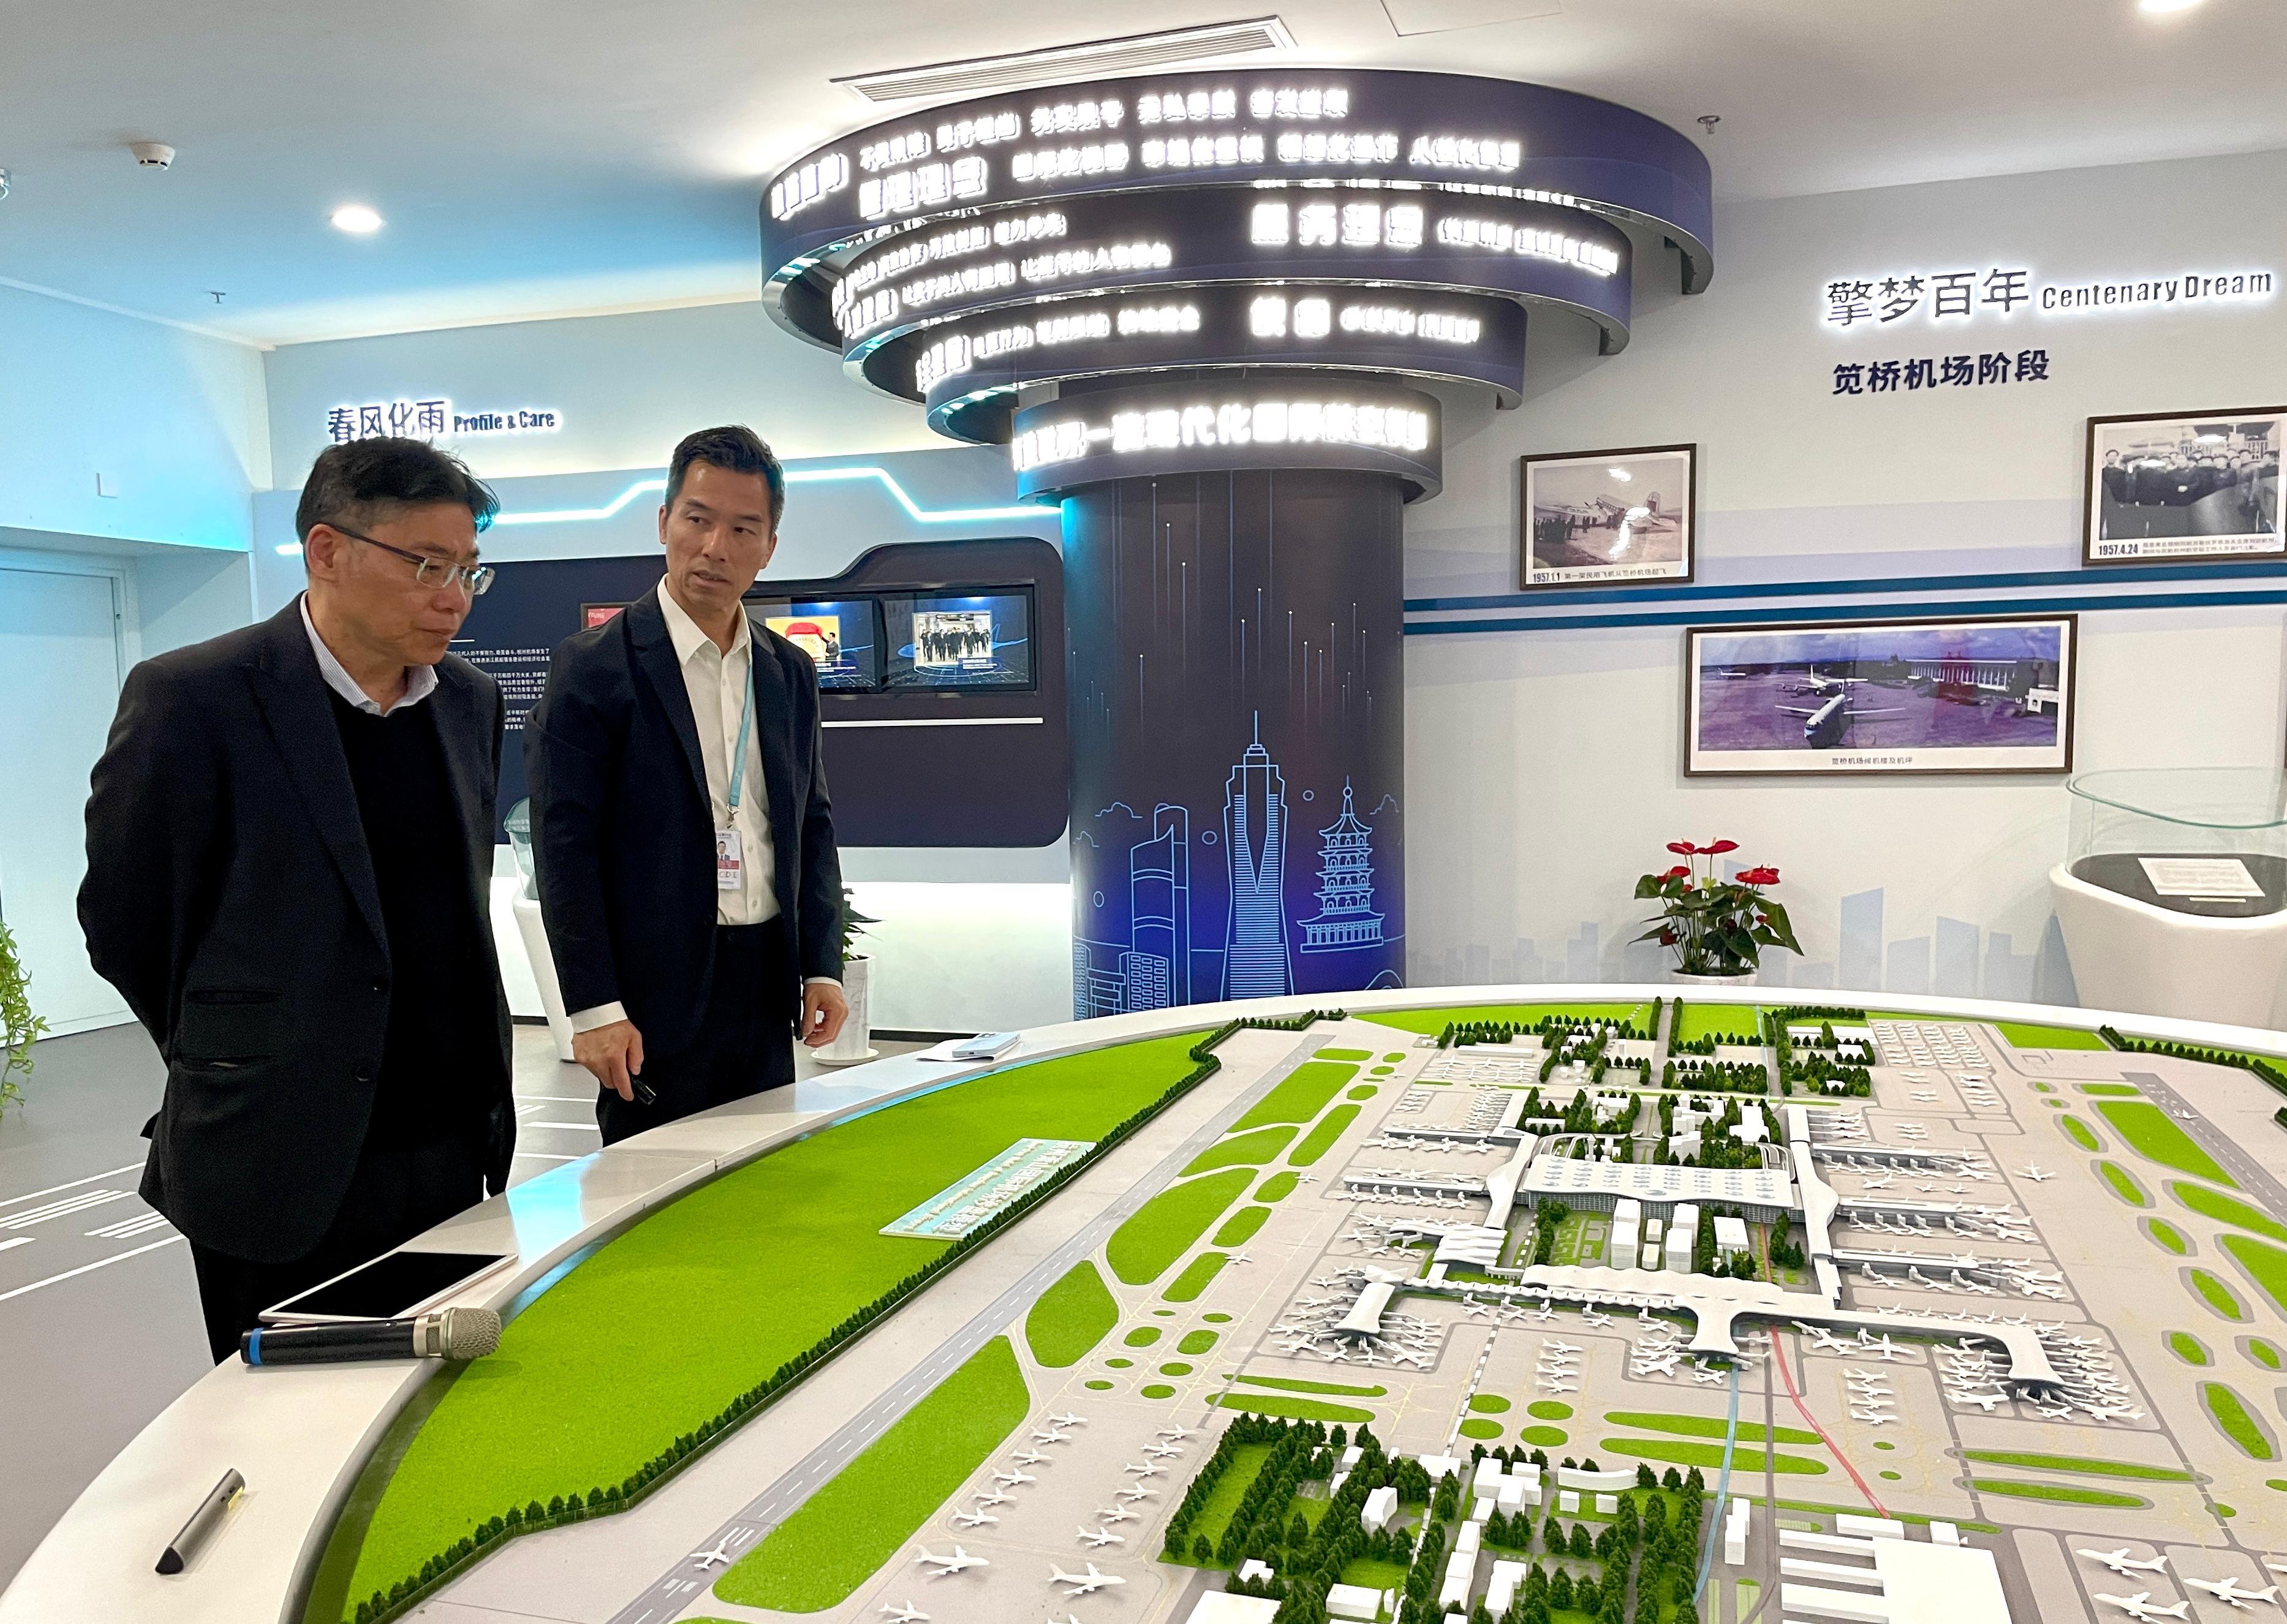 The Secretary for Transport and Logistics, Mr Lam Sai-hung (left), visits Hangzhou Xiaoshan International Airport today (December 7) and receives a briefing by representatives of the Airport Authority Hong Kong on the latest development at Hangzhou Xiaoshan International Airport.